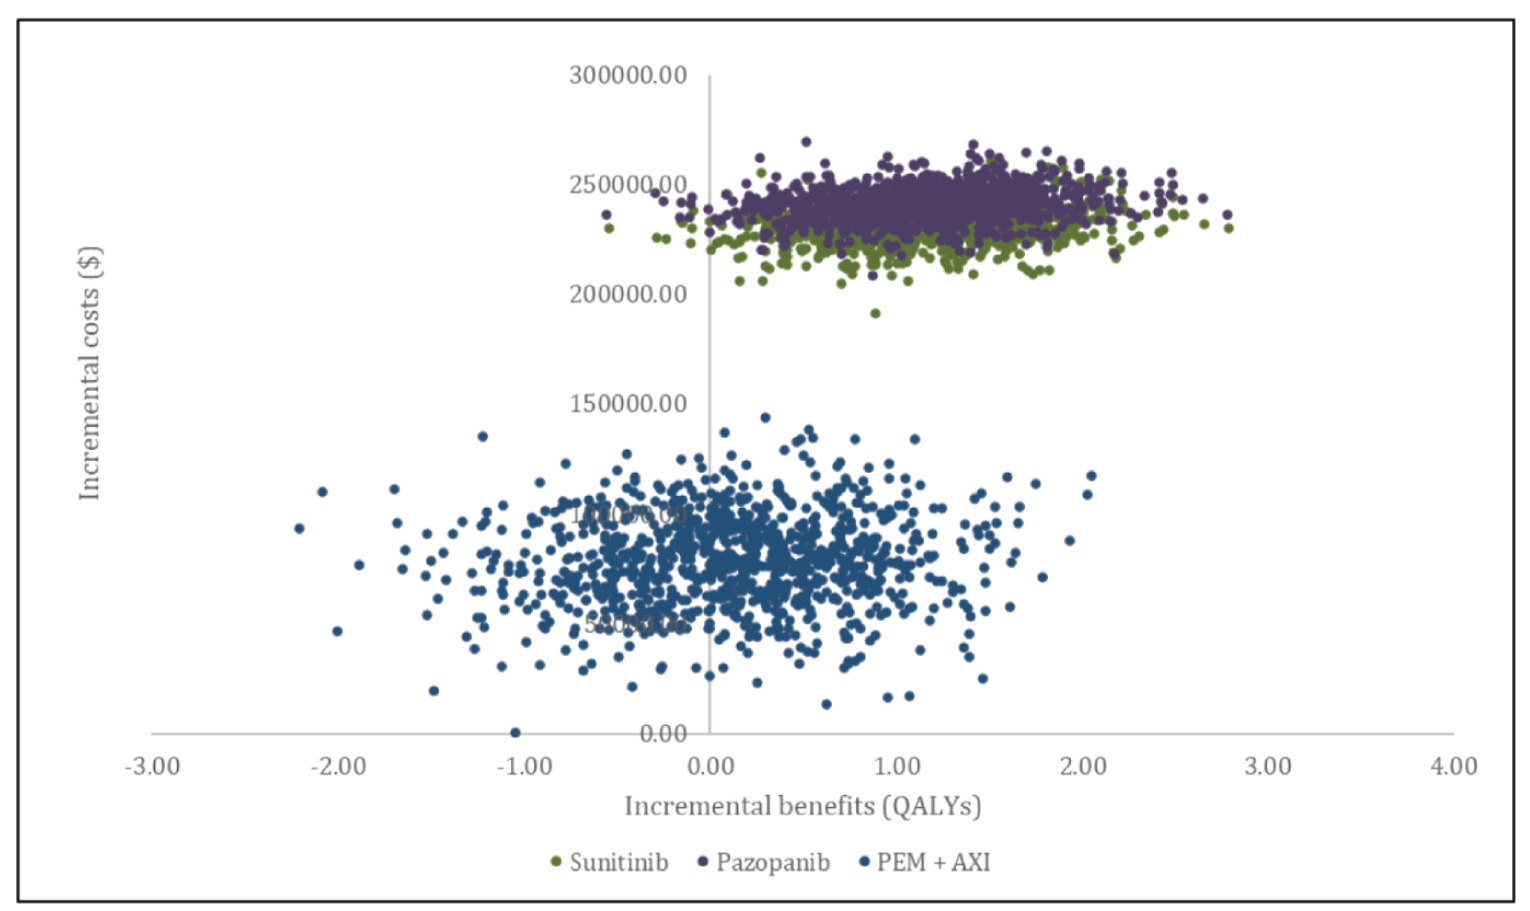 A set of scatterplots with “incremental costs ($)” from zero to 300,000 on the y-axis and “incremental benefits (QALYs)” from –3 to 4 on the x-axis. The scatterplot describing the probabilistic comparison to PEM-AXI lies above the x-axis and is symmetrically and evenly distributed across the y-axis between –2.0 and 2.0 QALYs (i.e., more costly, no effectiveness difference). Scatterplots describing the probabilistic comparison to SUN and PAZ both lie higher above the x-axis than PEM-AXI, and are to the right of the y-axis between 0 and 3.0 QALYs (i.e., more costly, more effective).